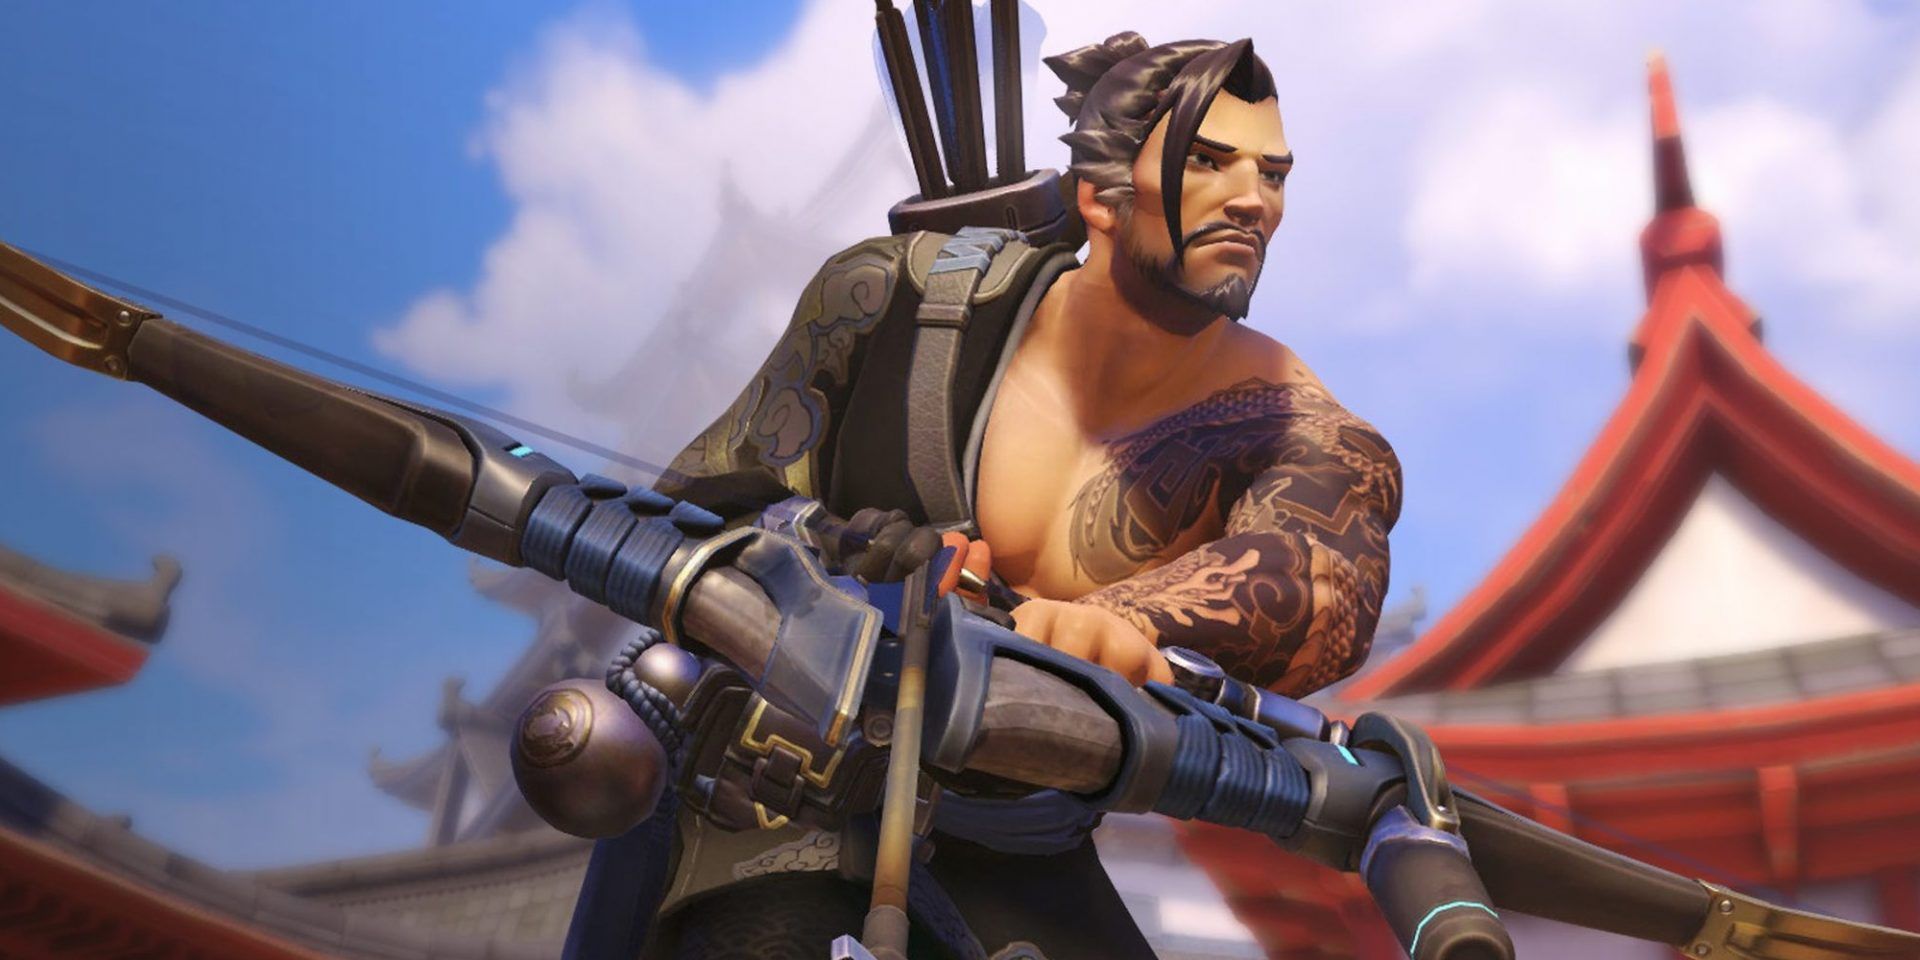 Hanzo runs with his bow and arrows